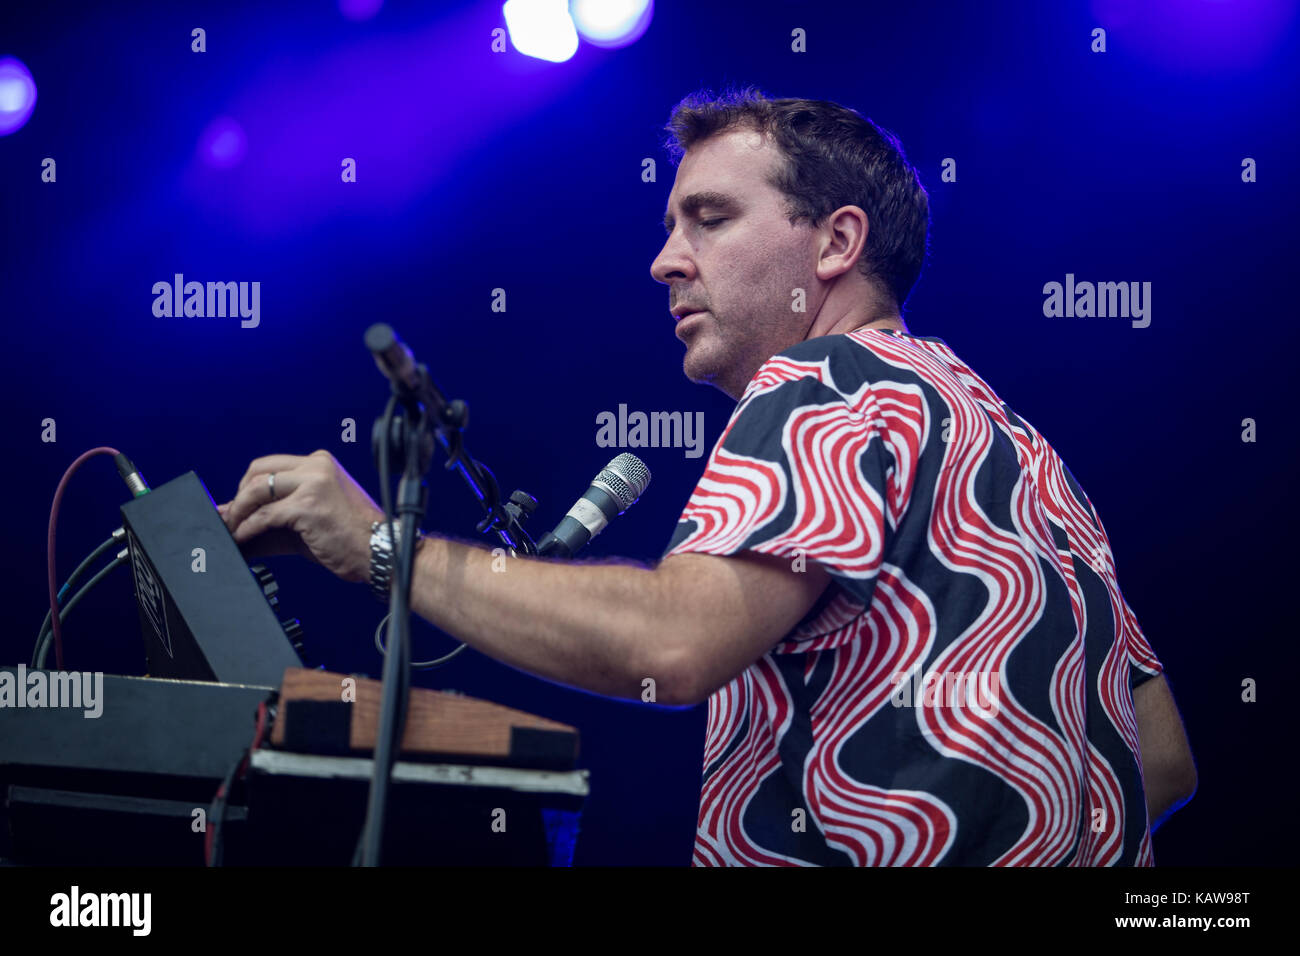 The British electronic music band Hot Chip performs a live concert at the music festival Lollapalooza 2015 in Berlin. Here musician Joe Goddard on synth is seen live on stage. Germany, 12/09 2015. Stock Photo